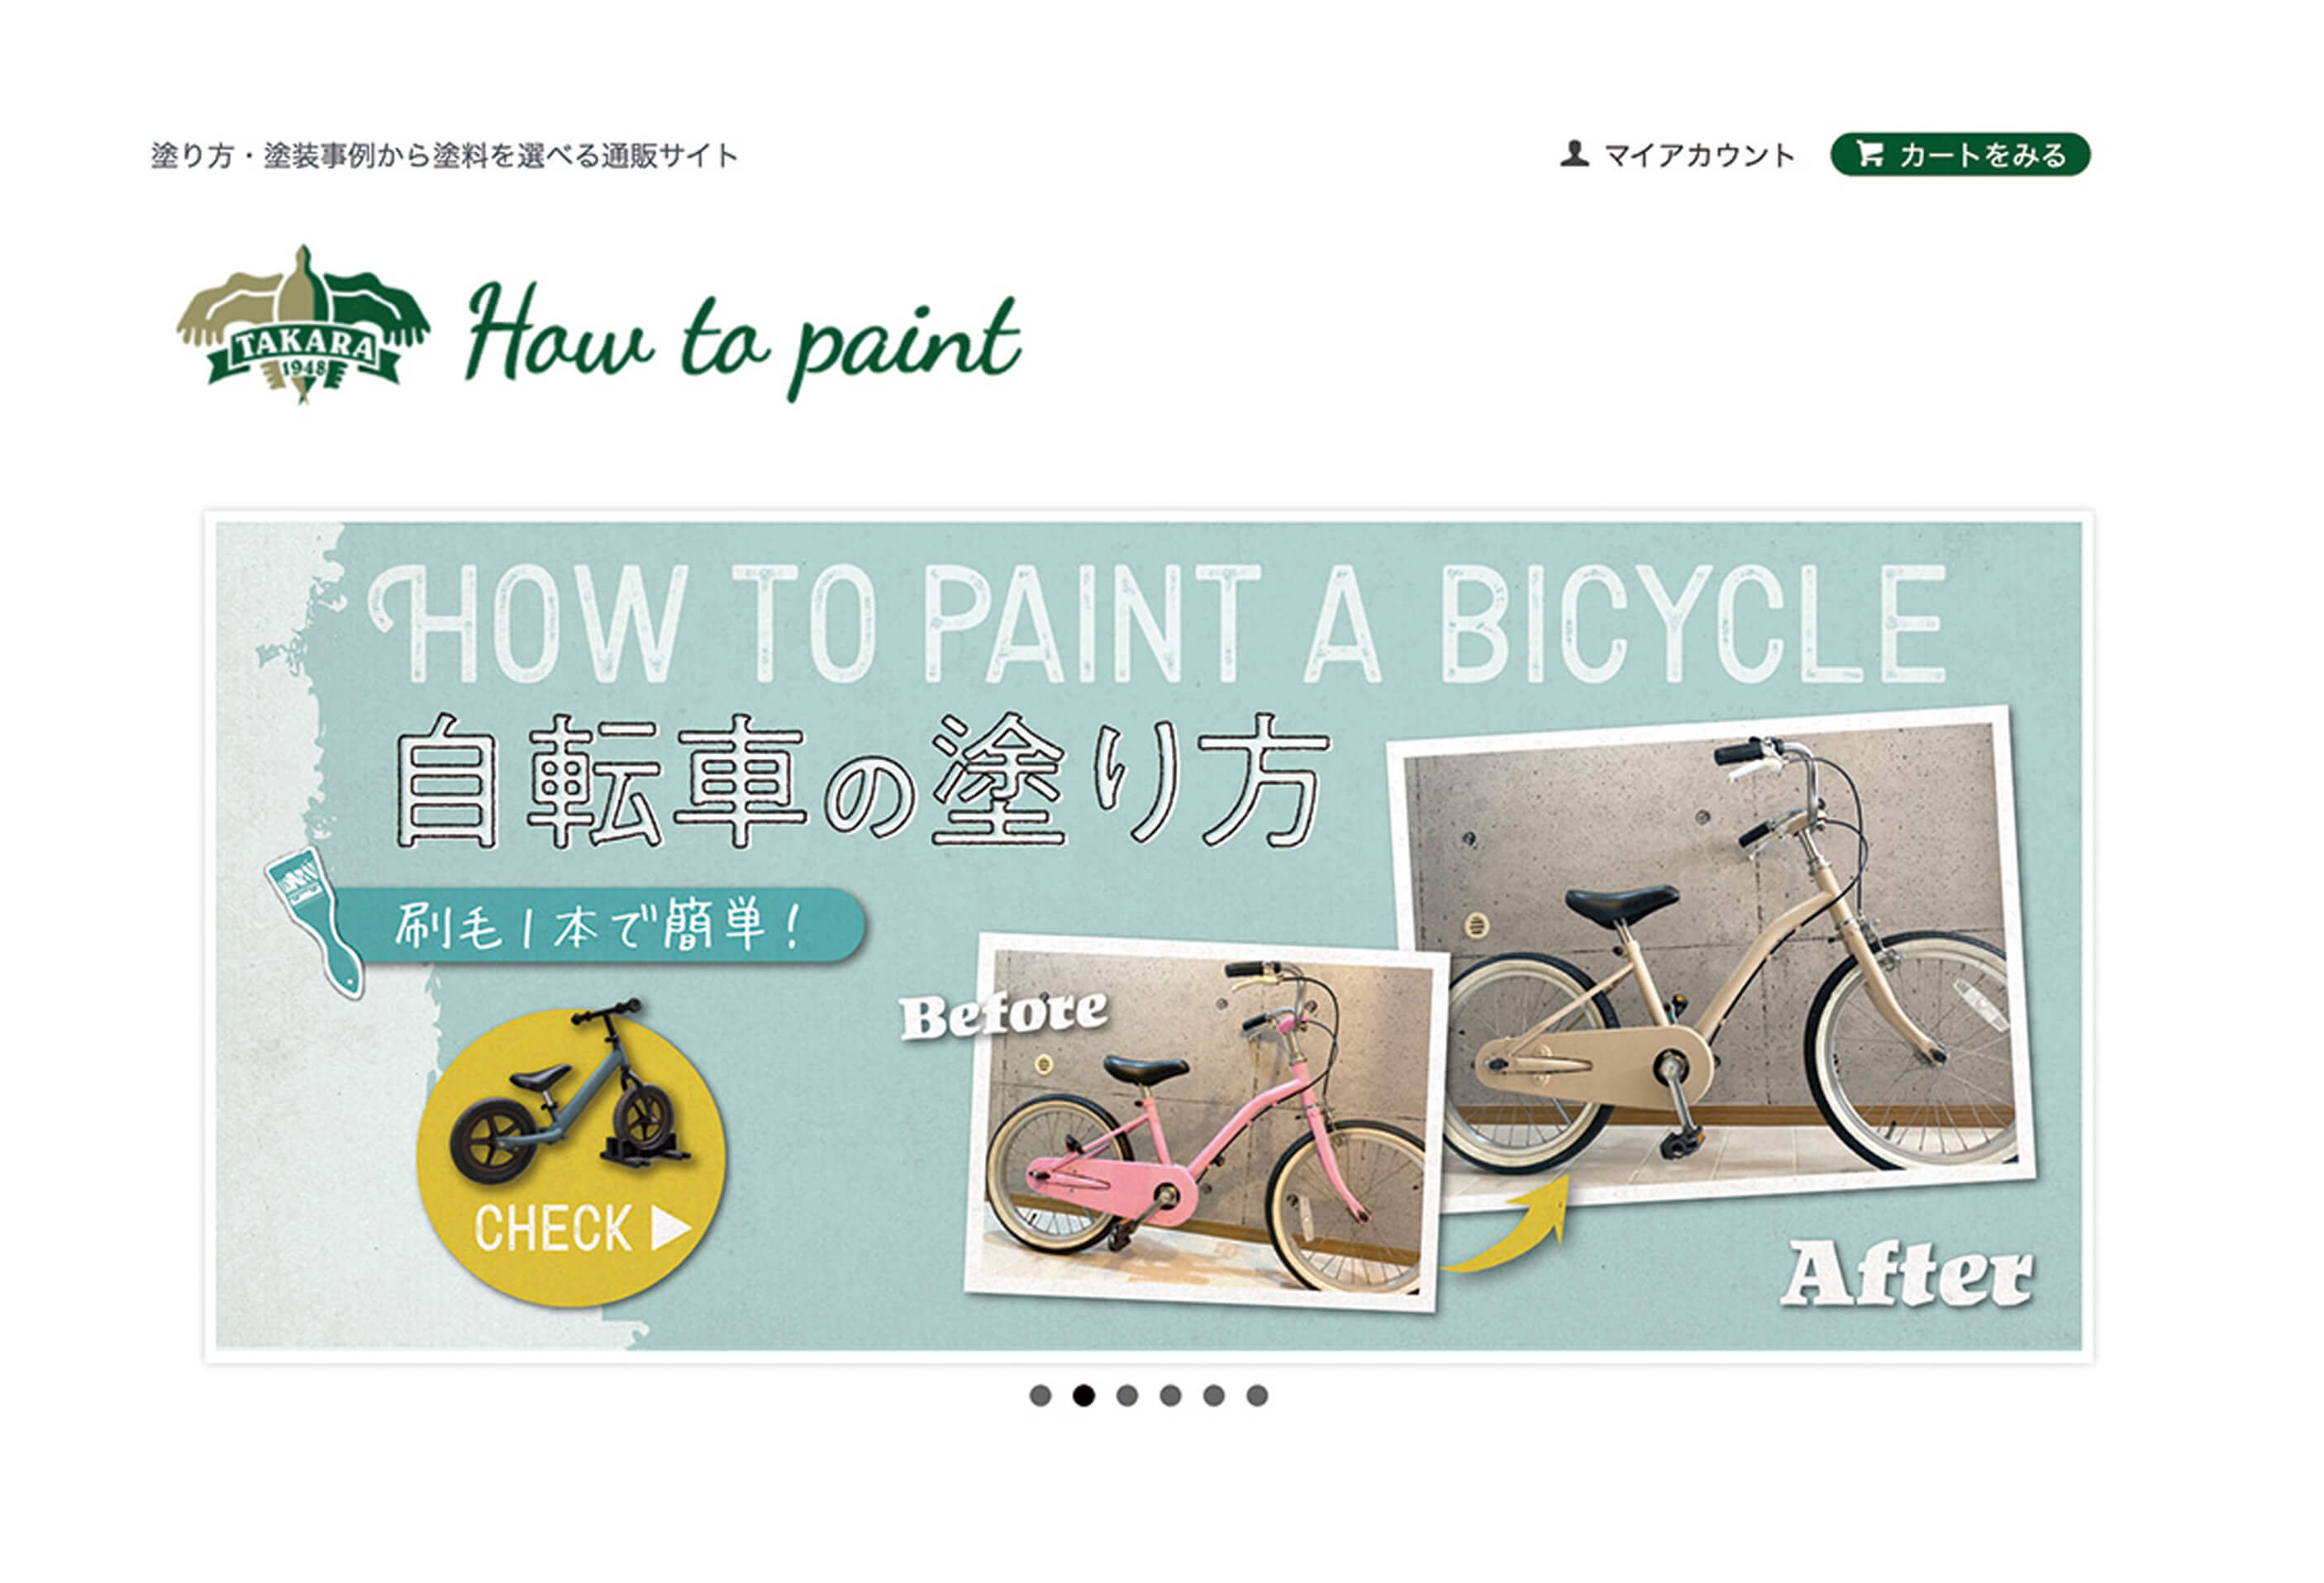 HOW TO PAINT